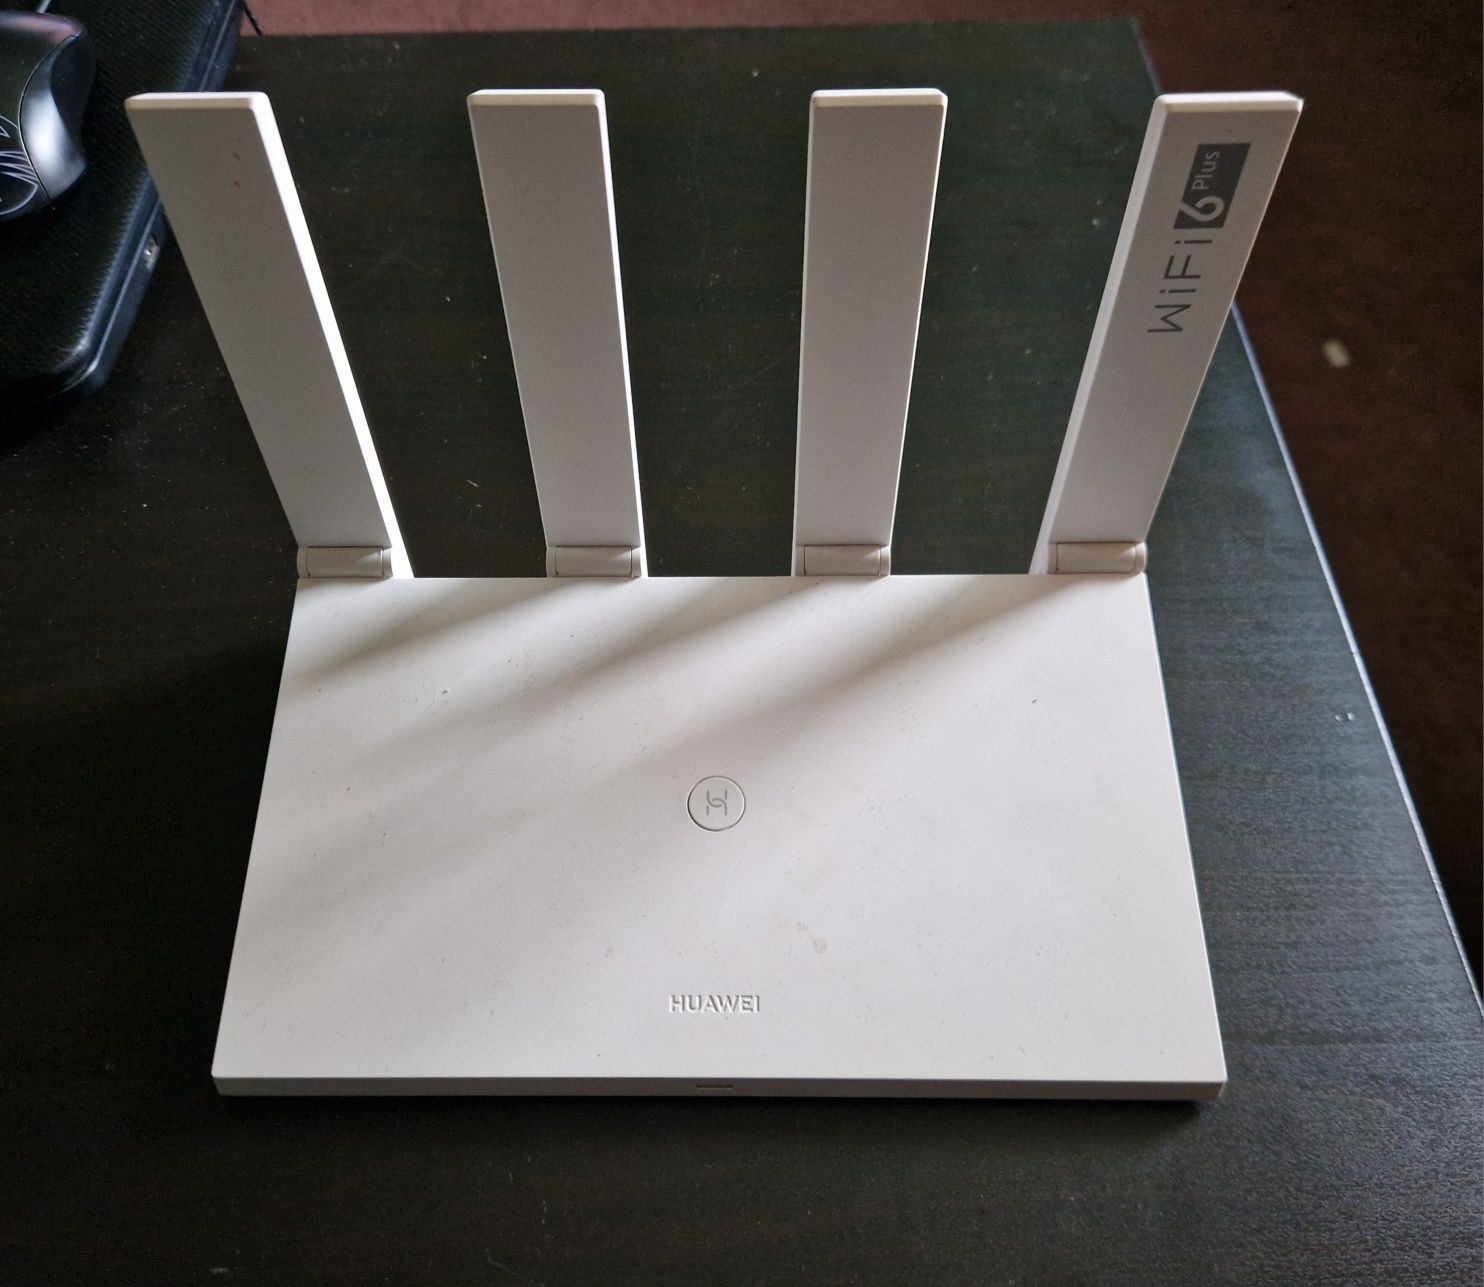 Router Huawei WS7100